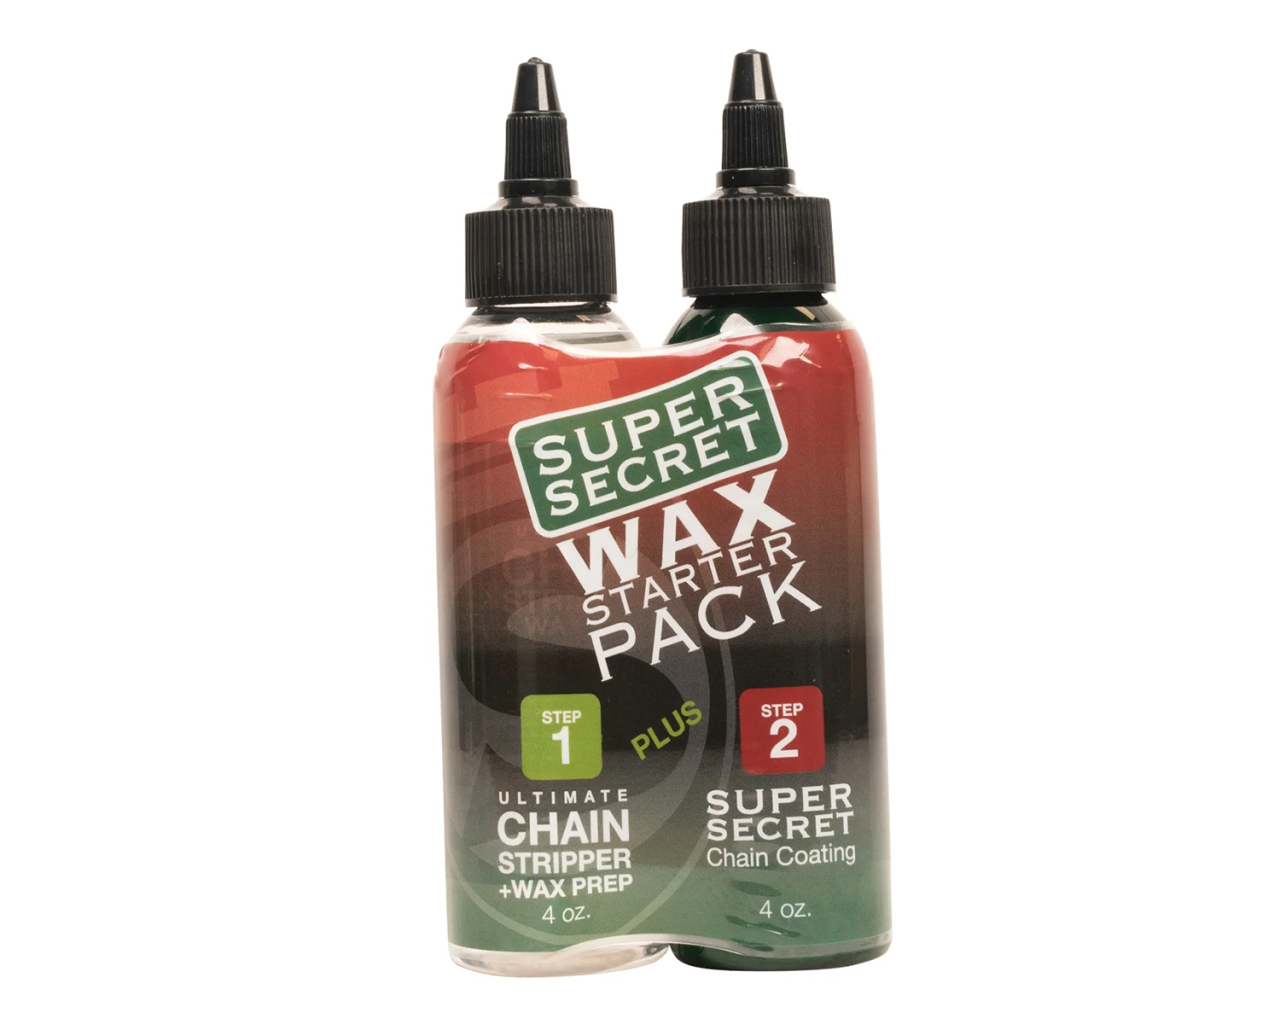 Silca Wax Starter Pack | Merlin Cycles